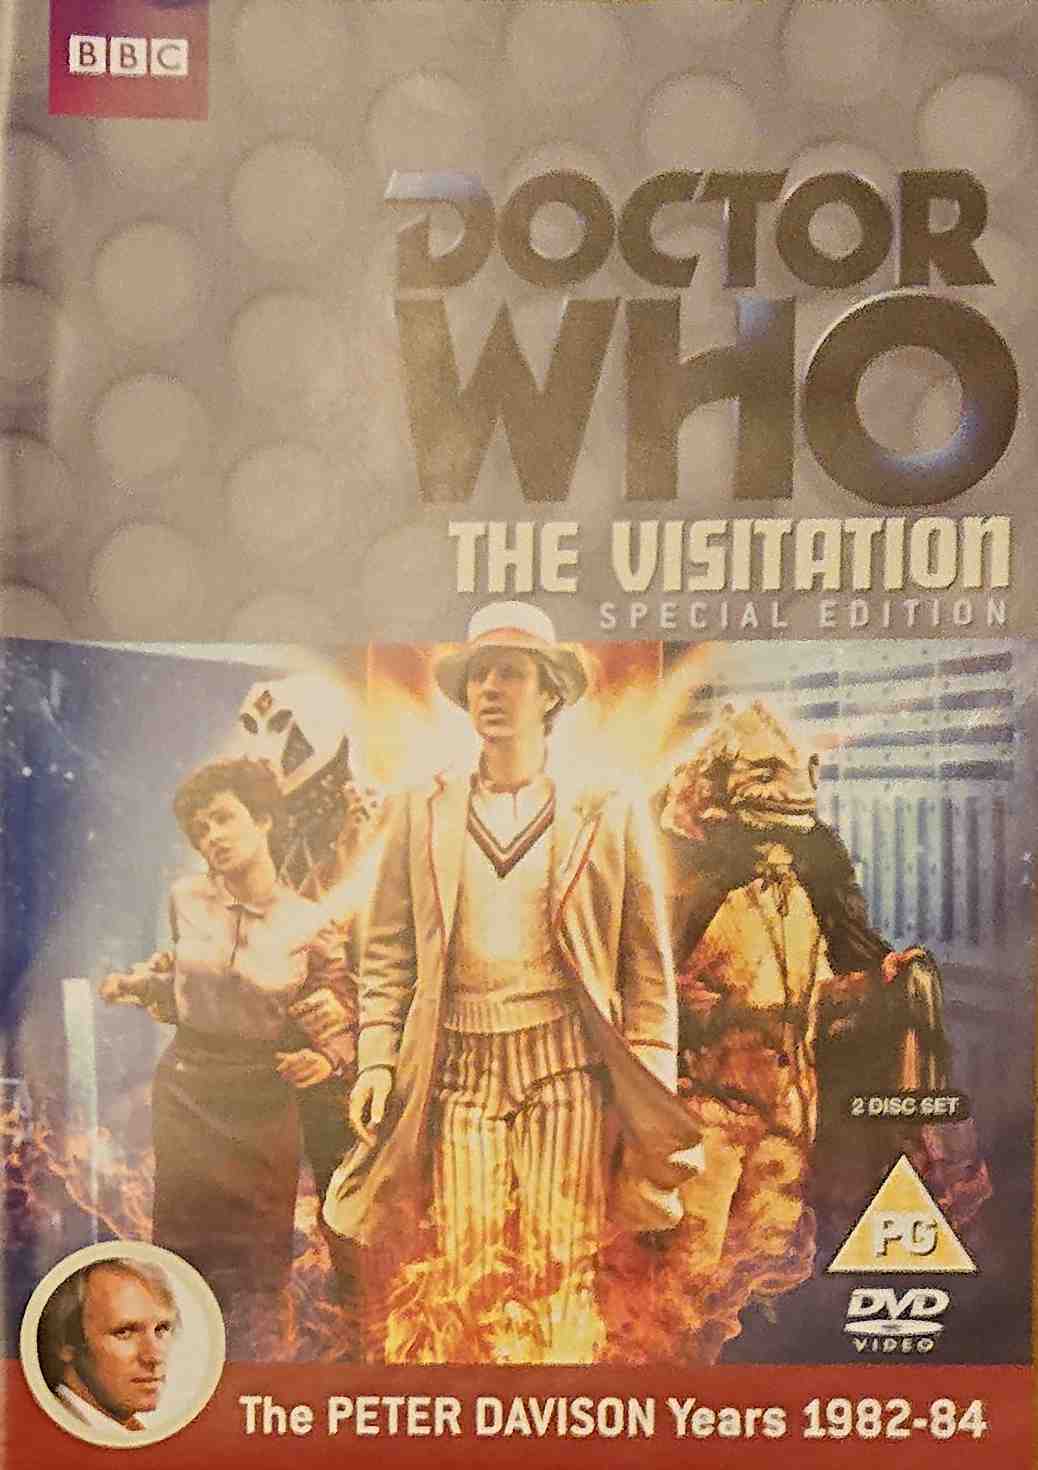 Picture of BBCDVD 3690 Doctor Who - The visitation by artist Eric Saward